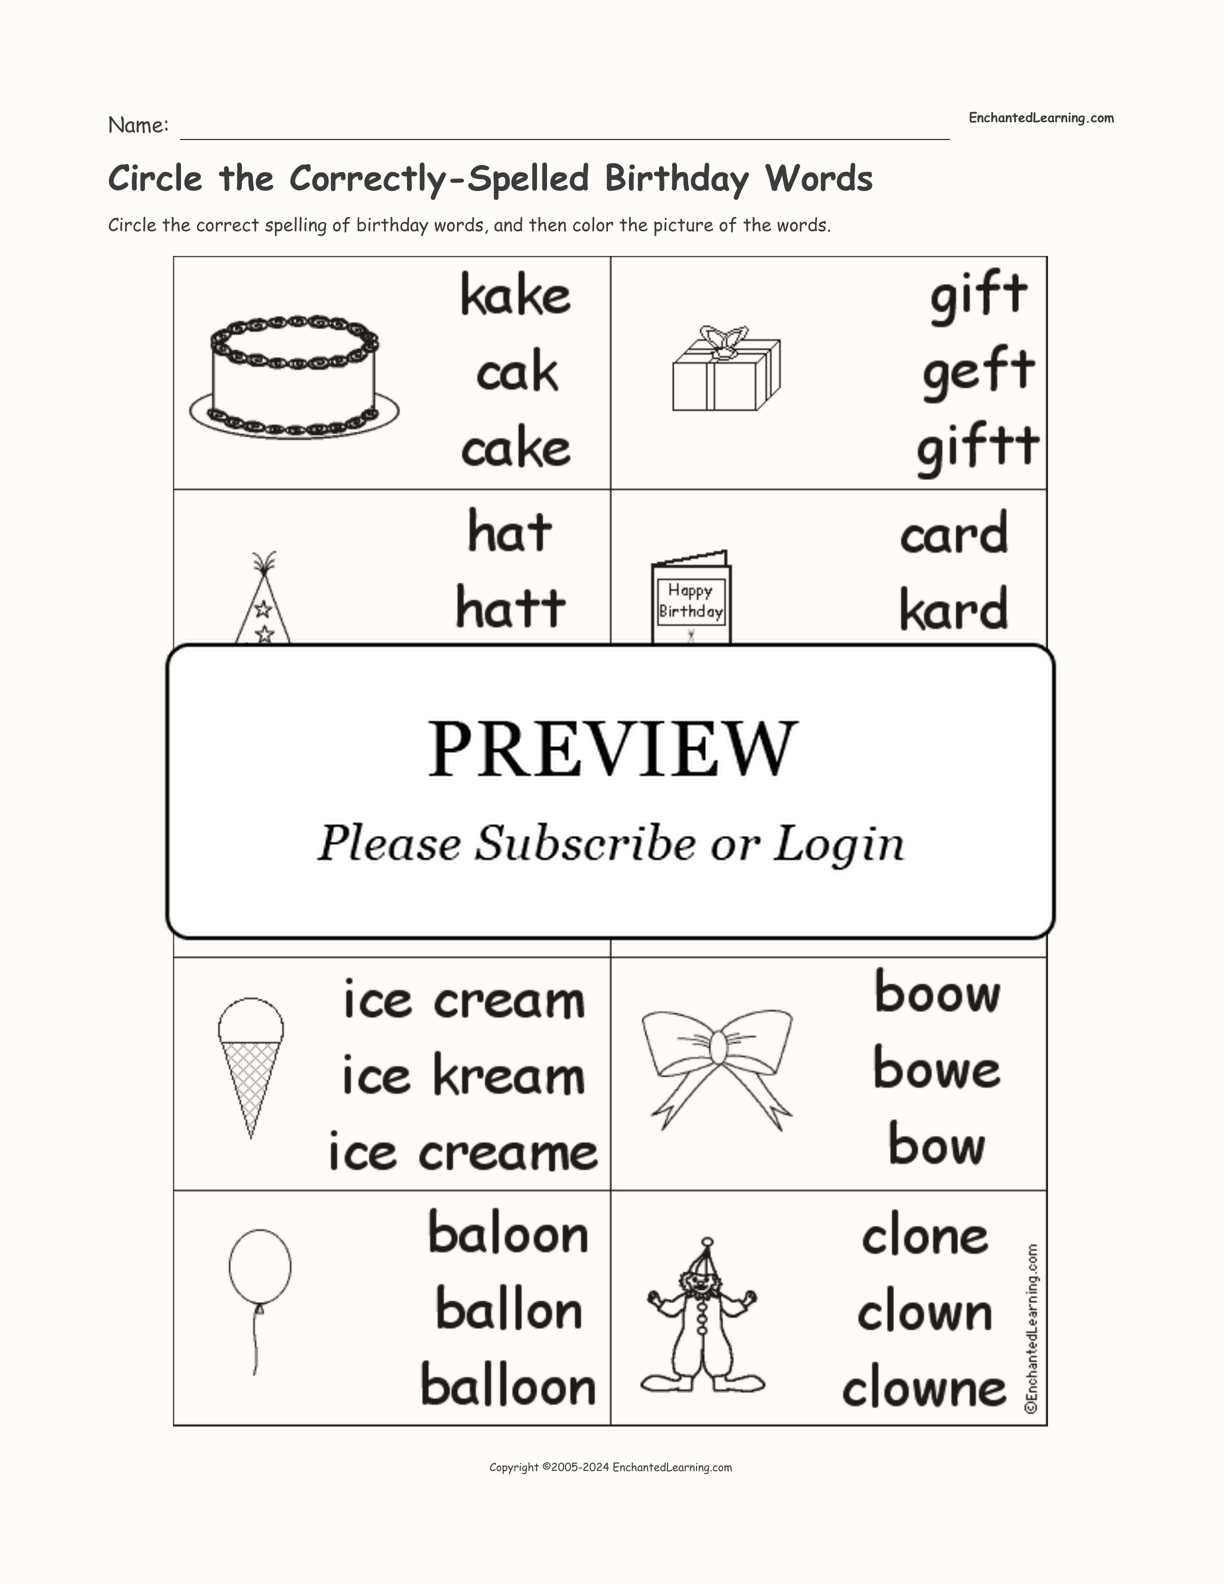 Circle the Correctly-Spelled Birthday Words interactive worksheet page 1